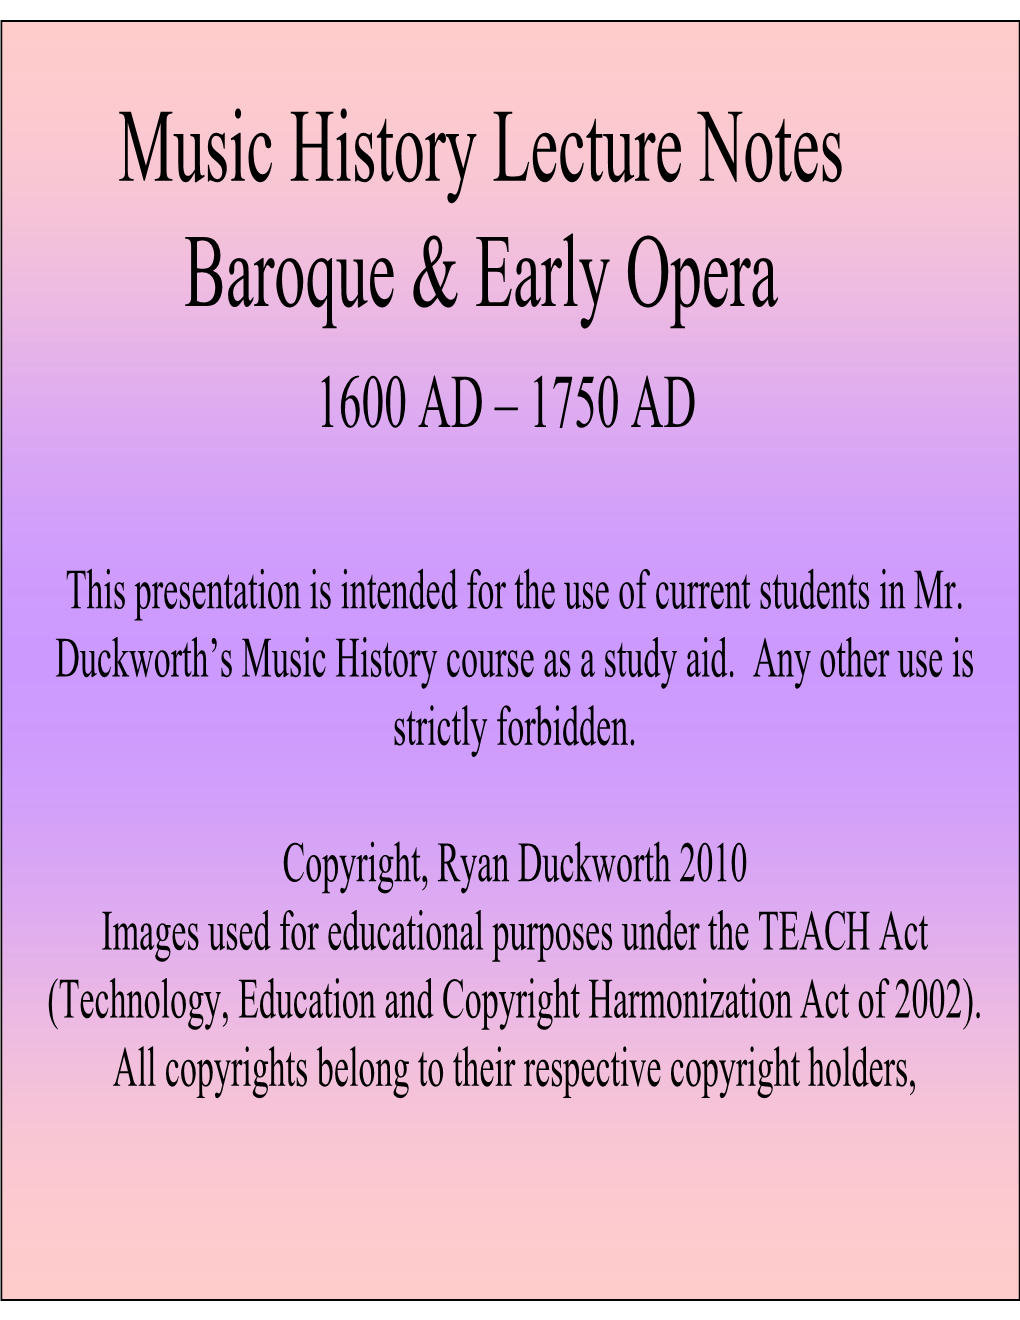 Music History Lecture Notes Baroque & Early Opera